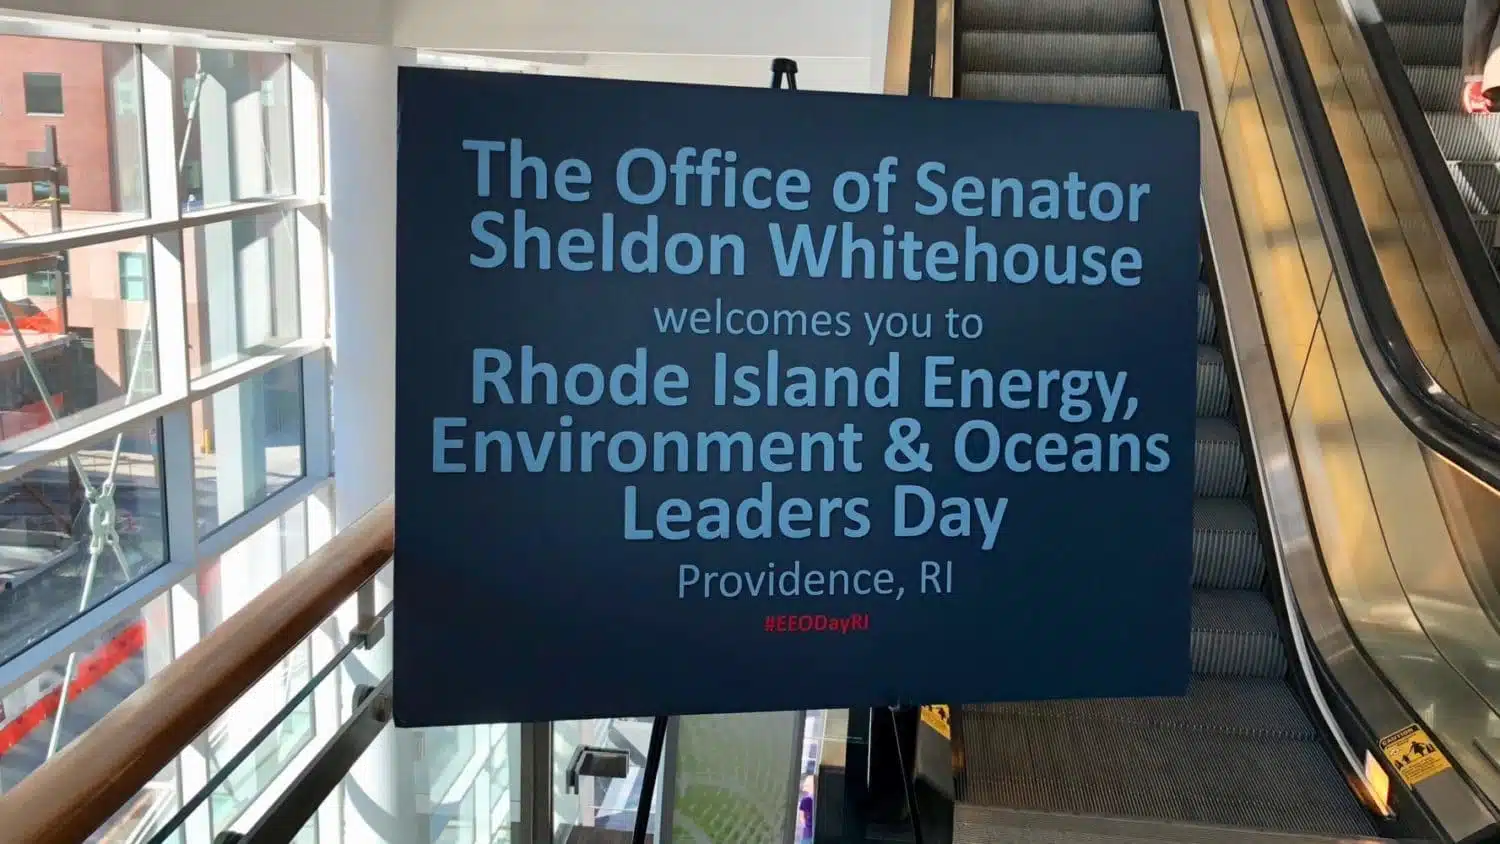 Senator Whitehouse’s annual climate event details the paucity of our response